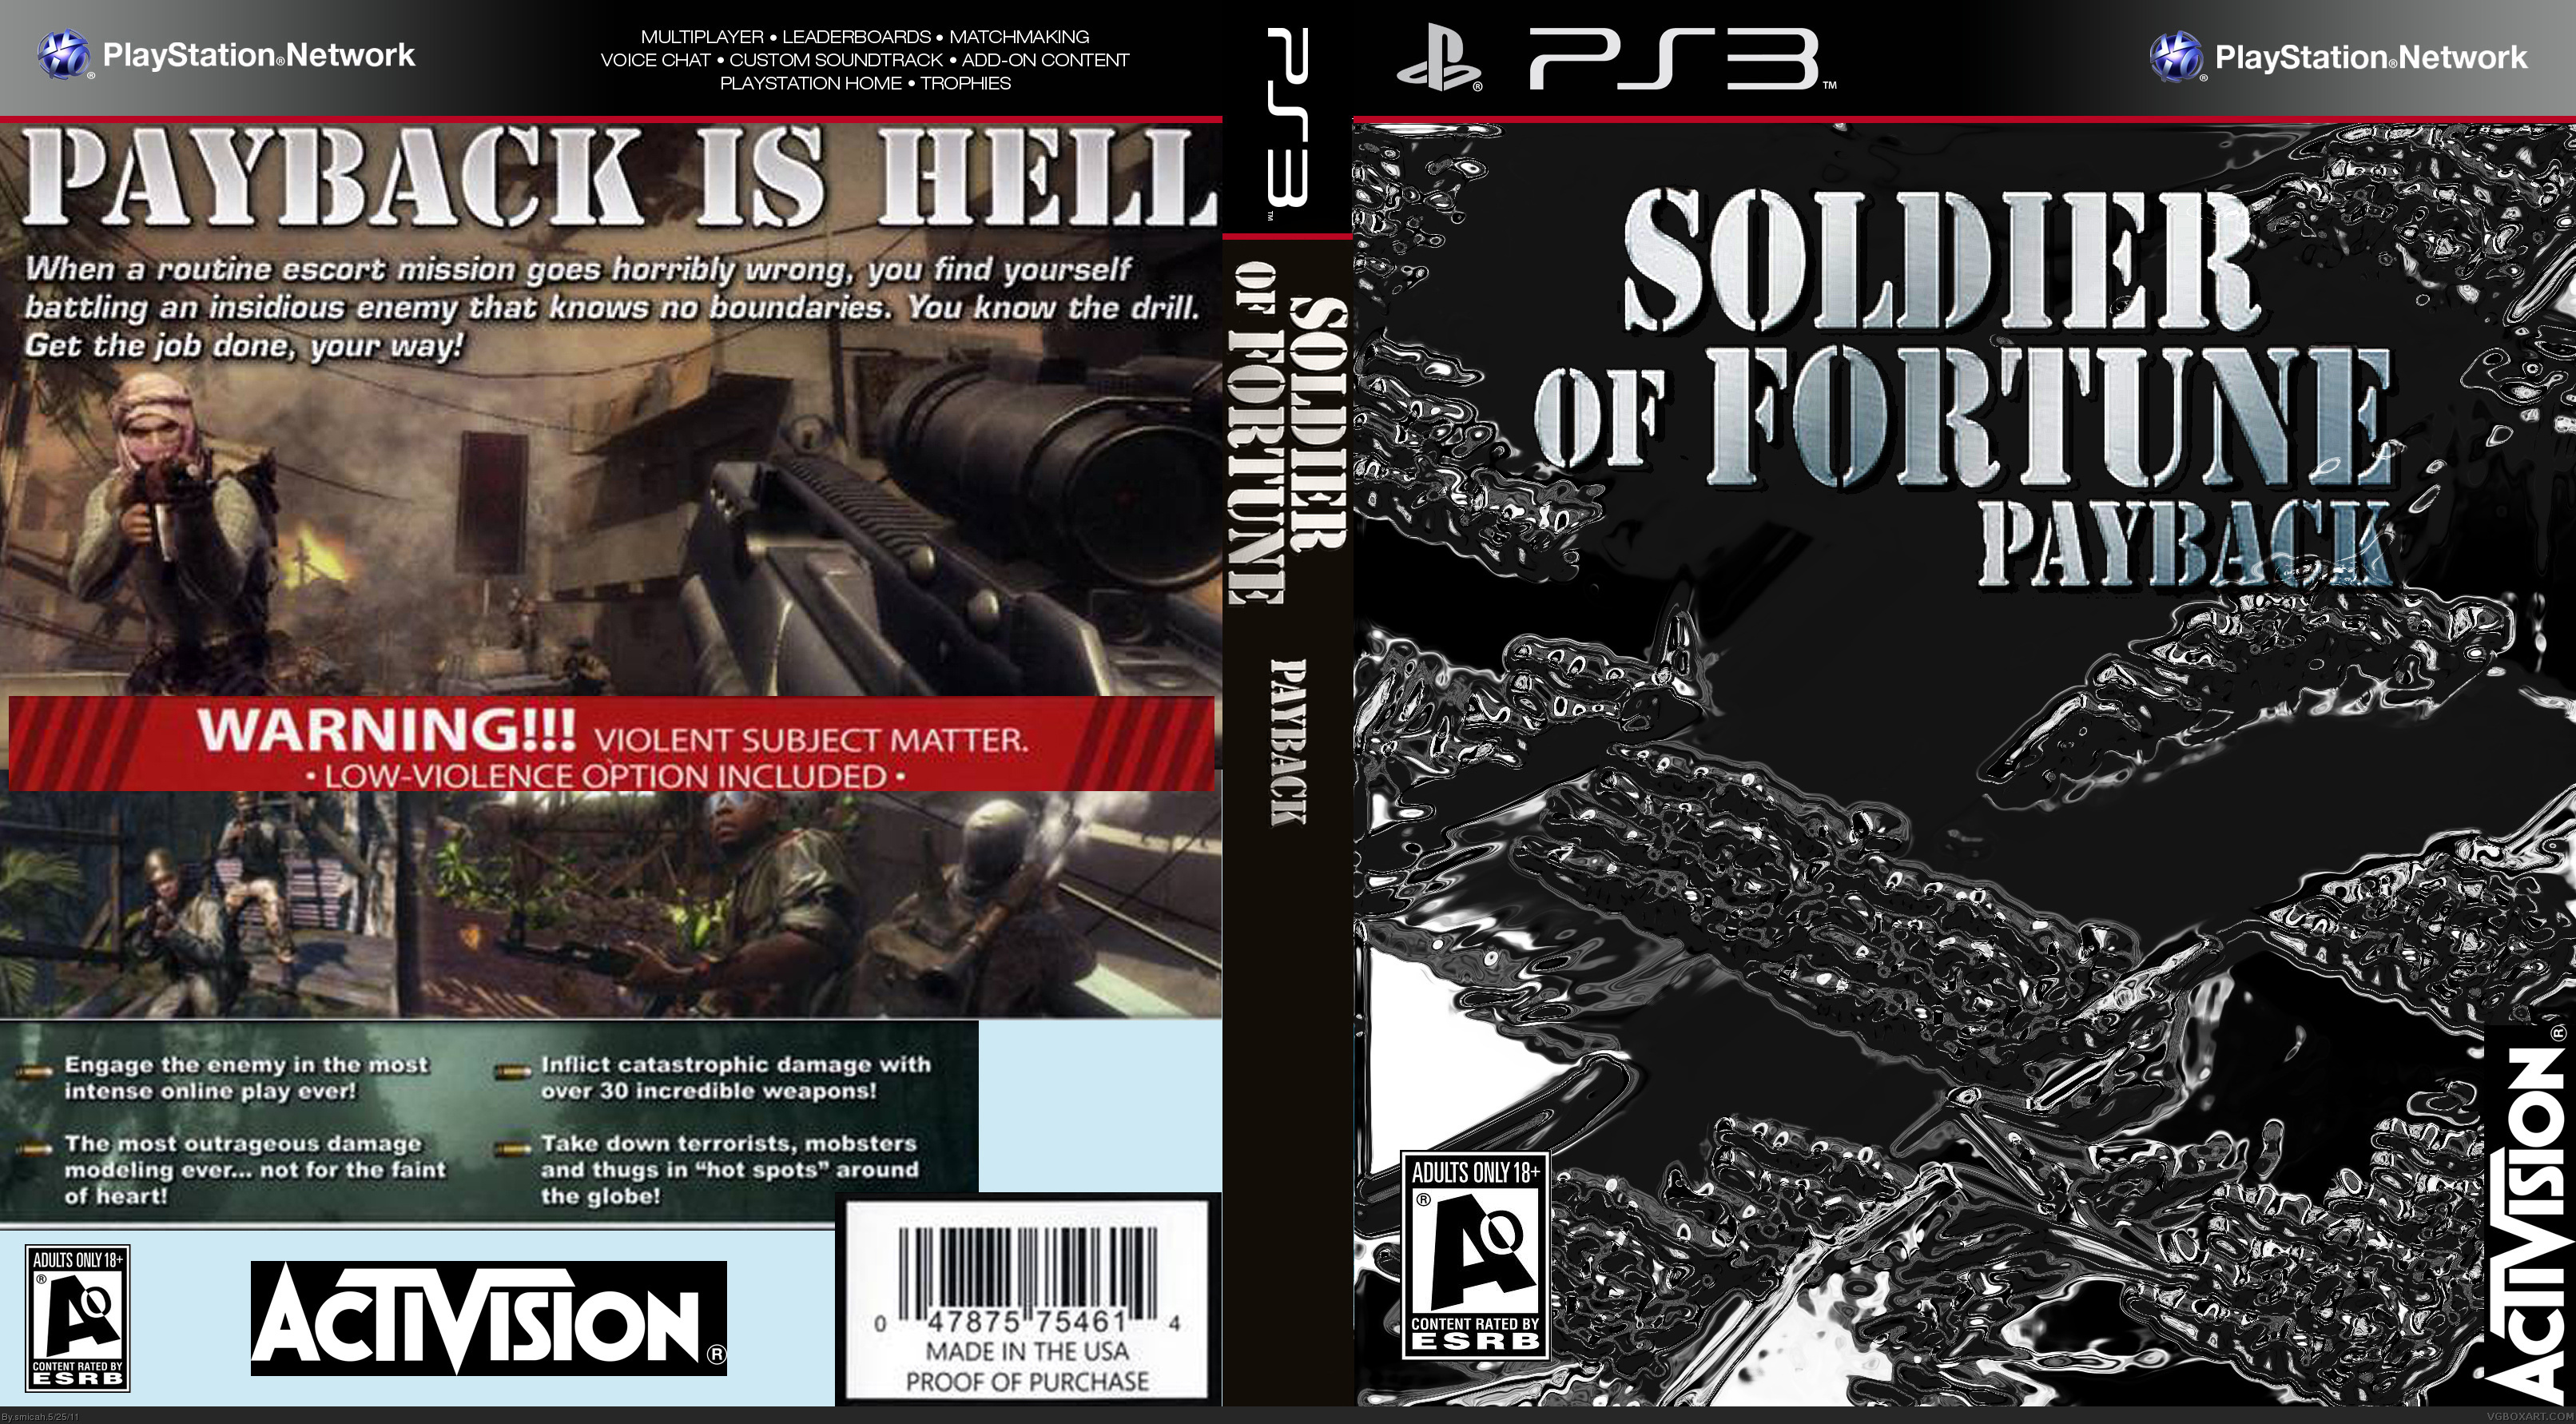 Soldier Of Fortune Payback box cover